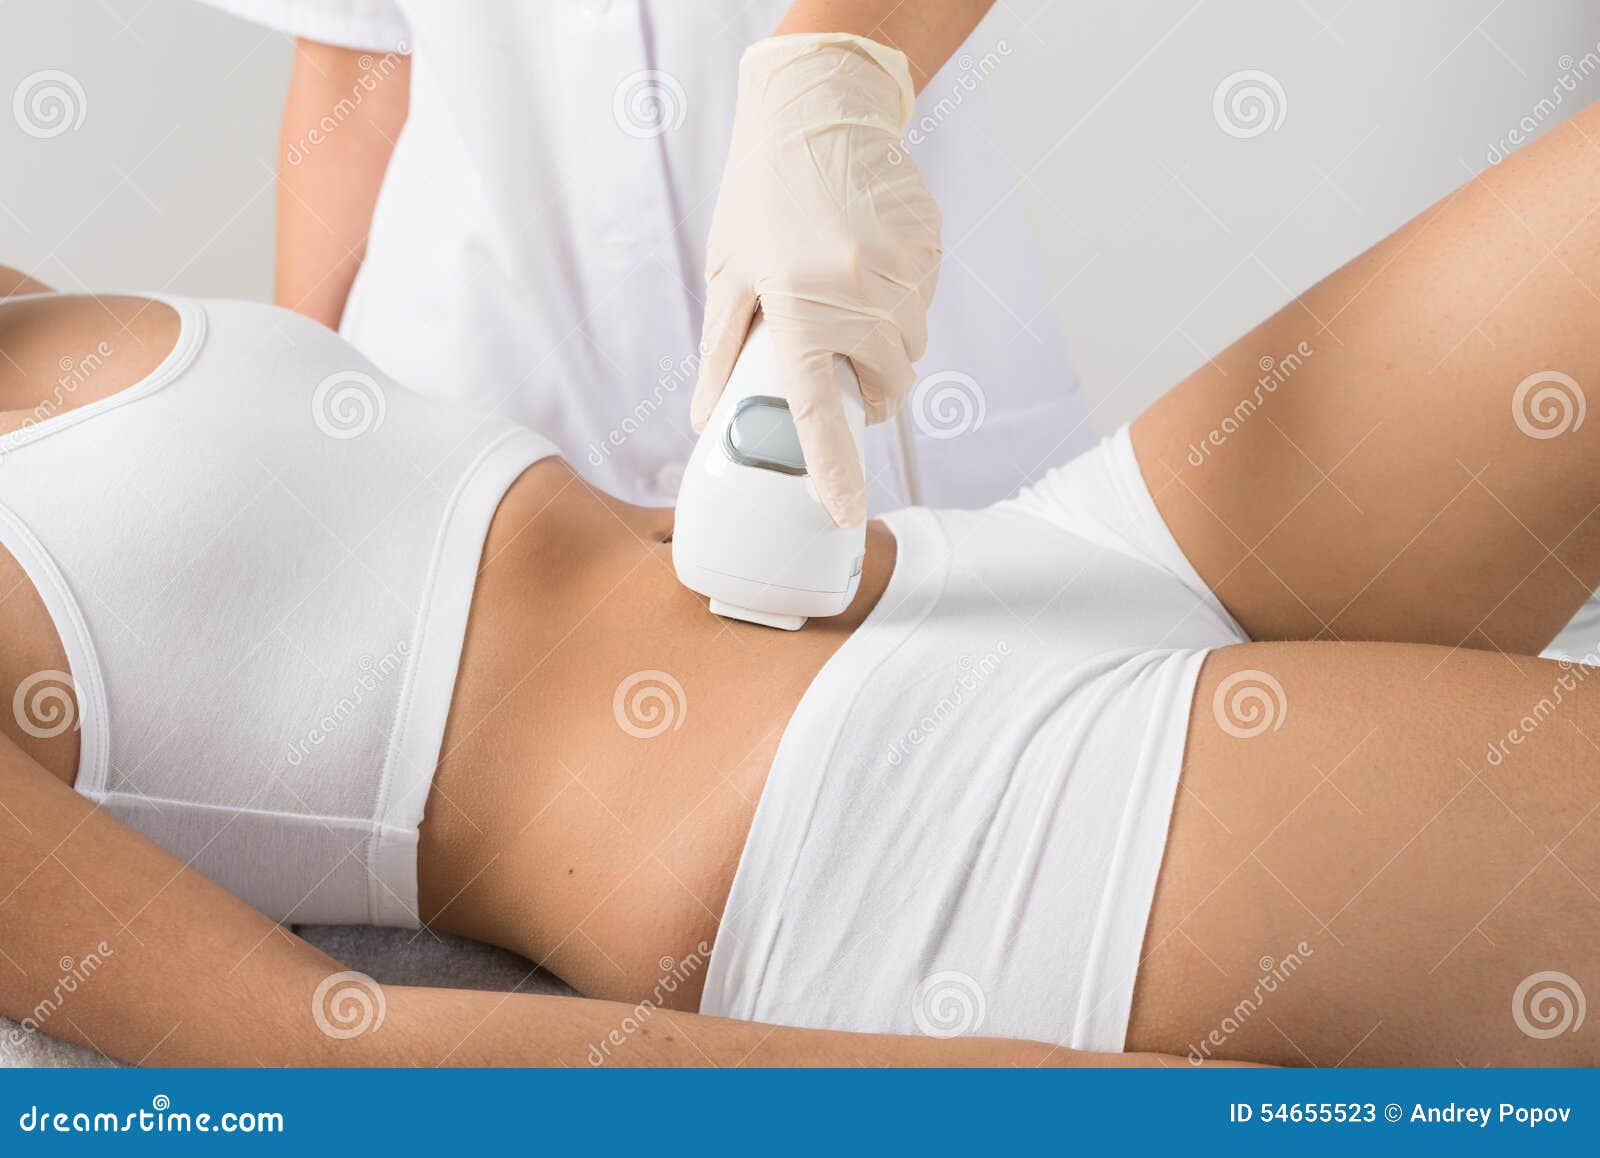 woman receiving laser treatment on belly